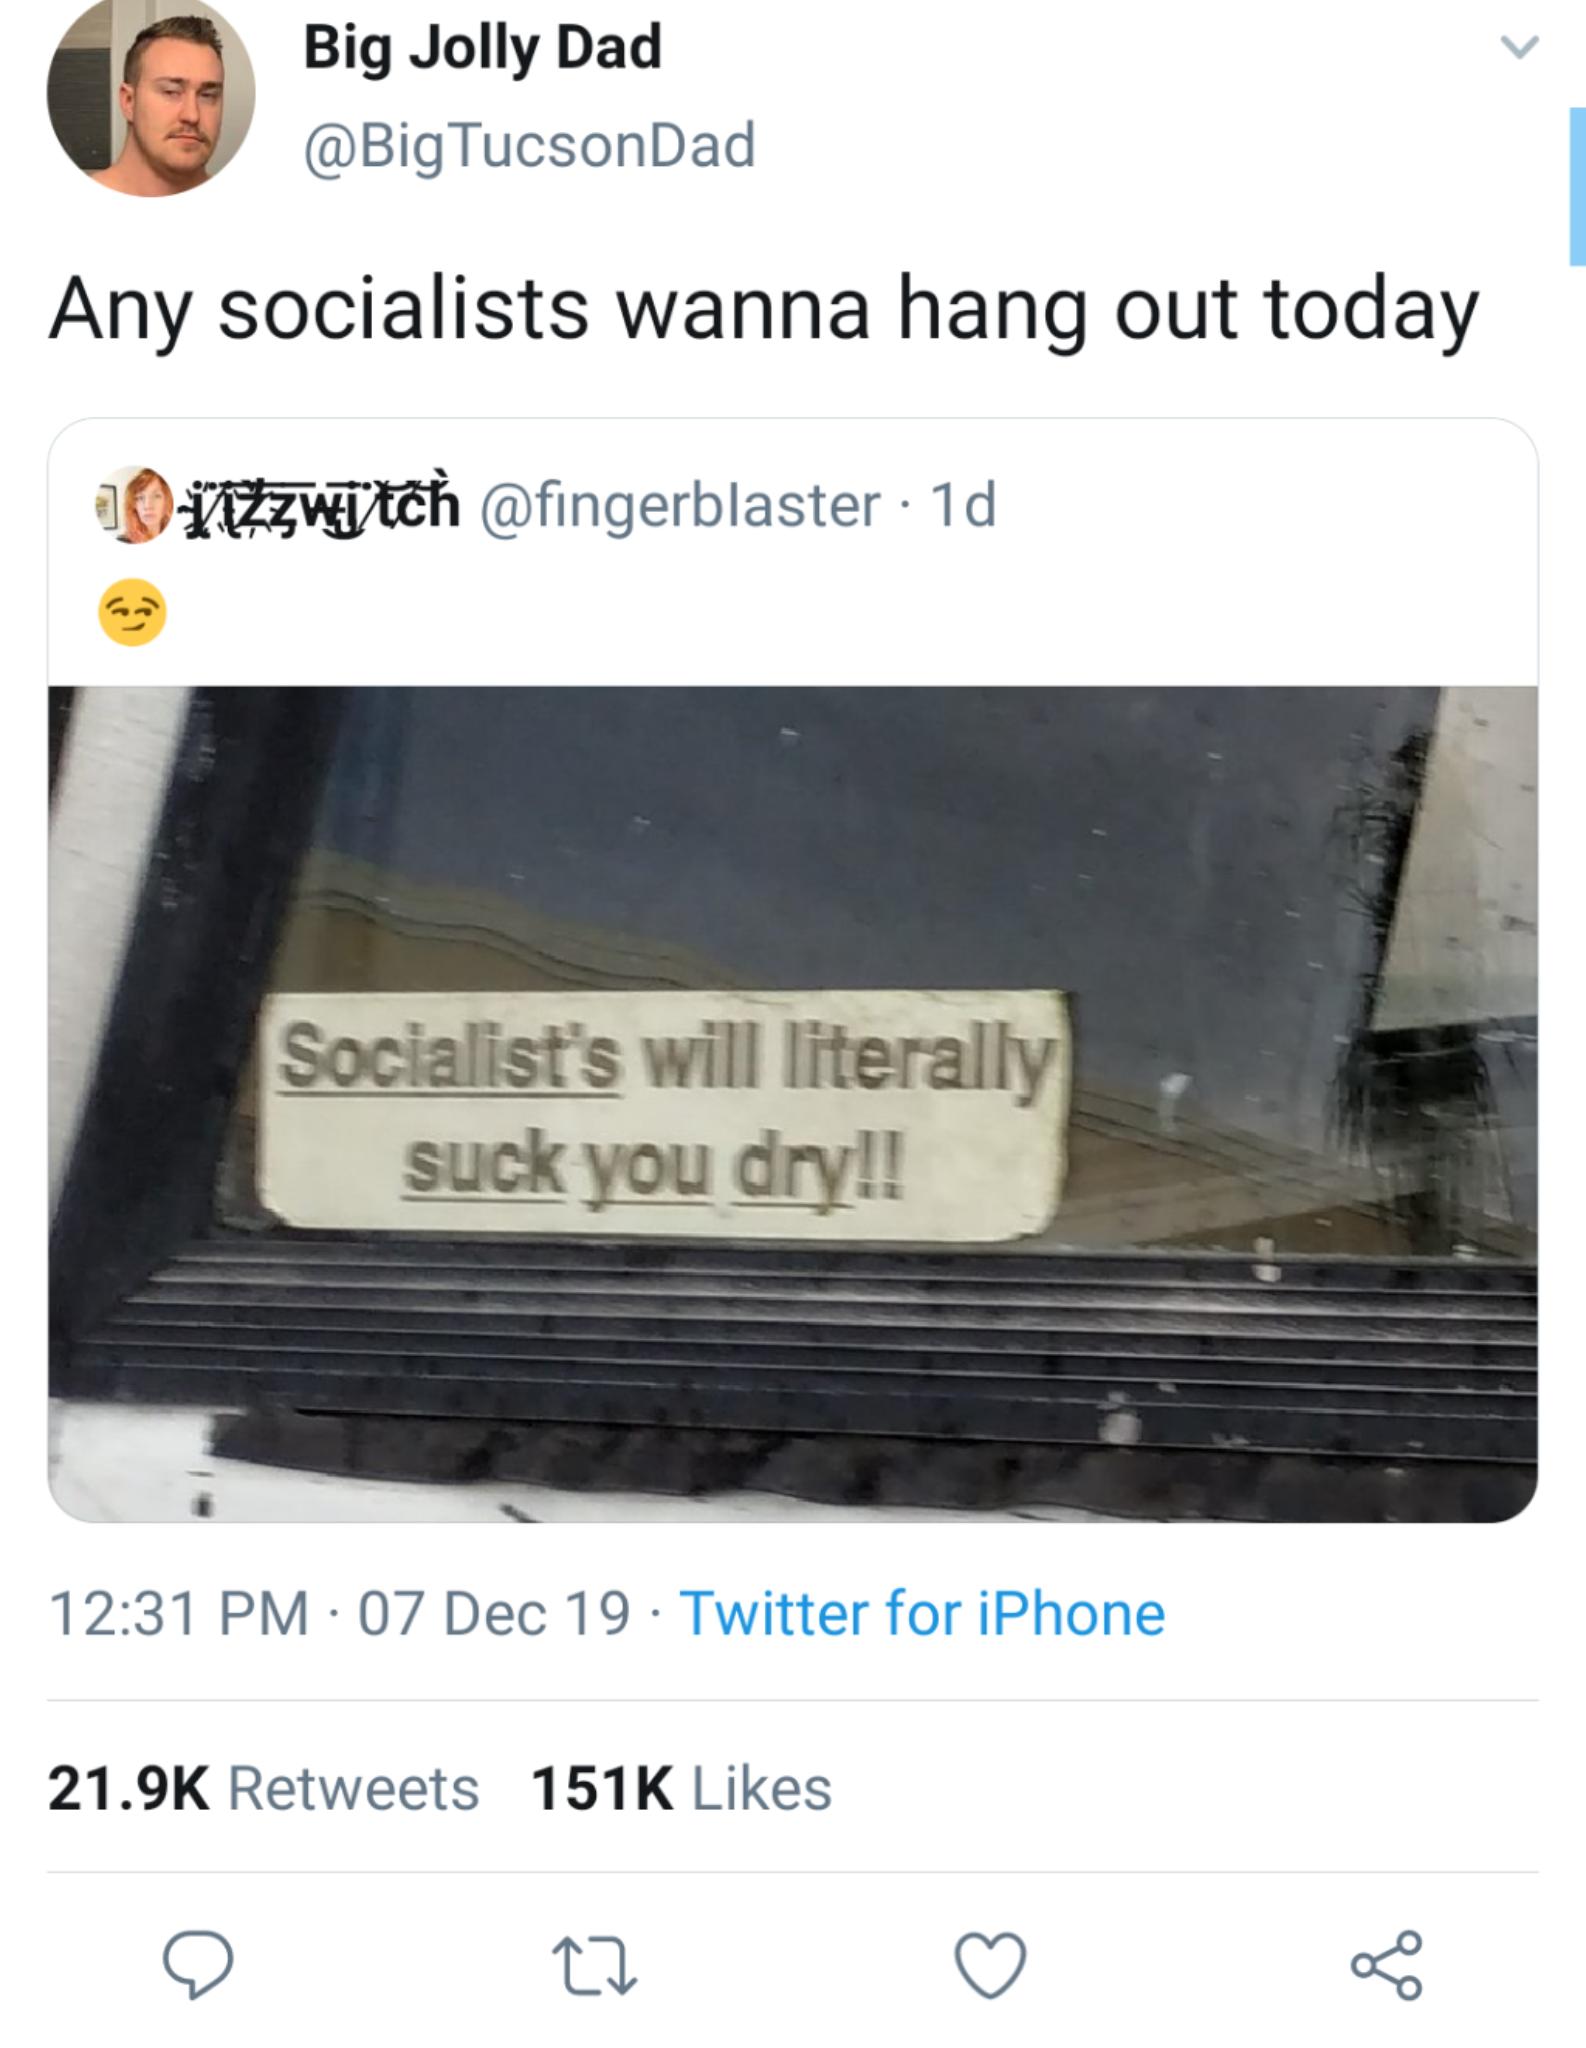 Big Jolly Dad Any socialists wanna hang out today ViZzwyt 1d Socialist's will literally suck you dry!! 07 Dec 19. Twitter for iPhone 1516